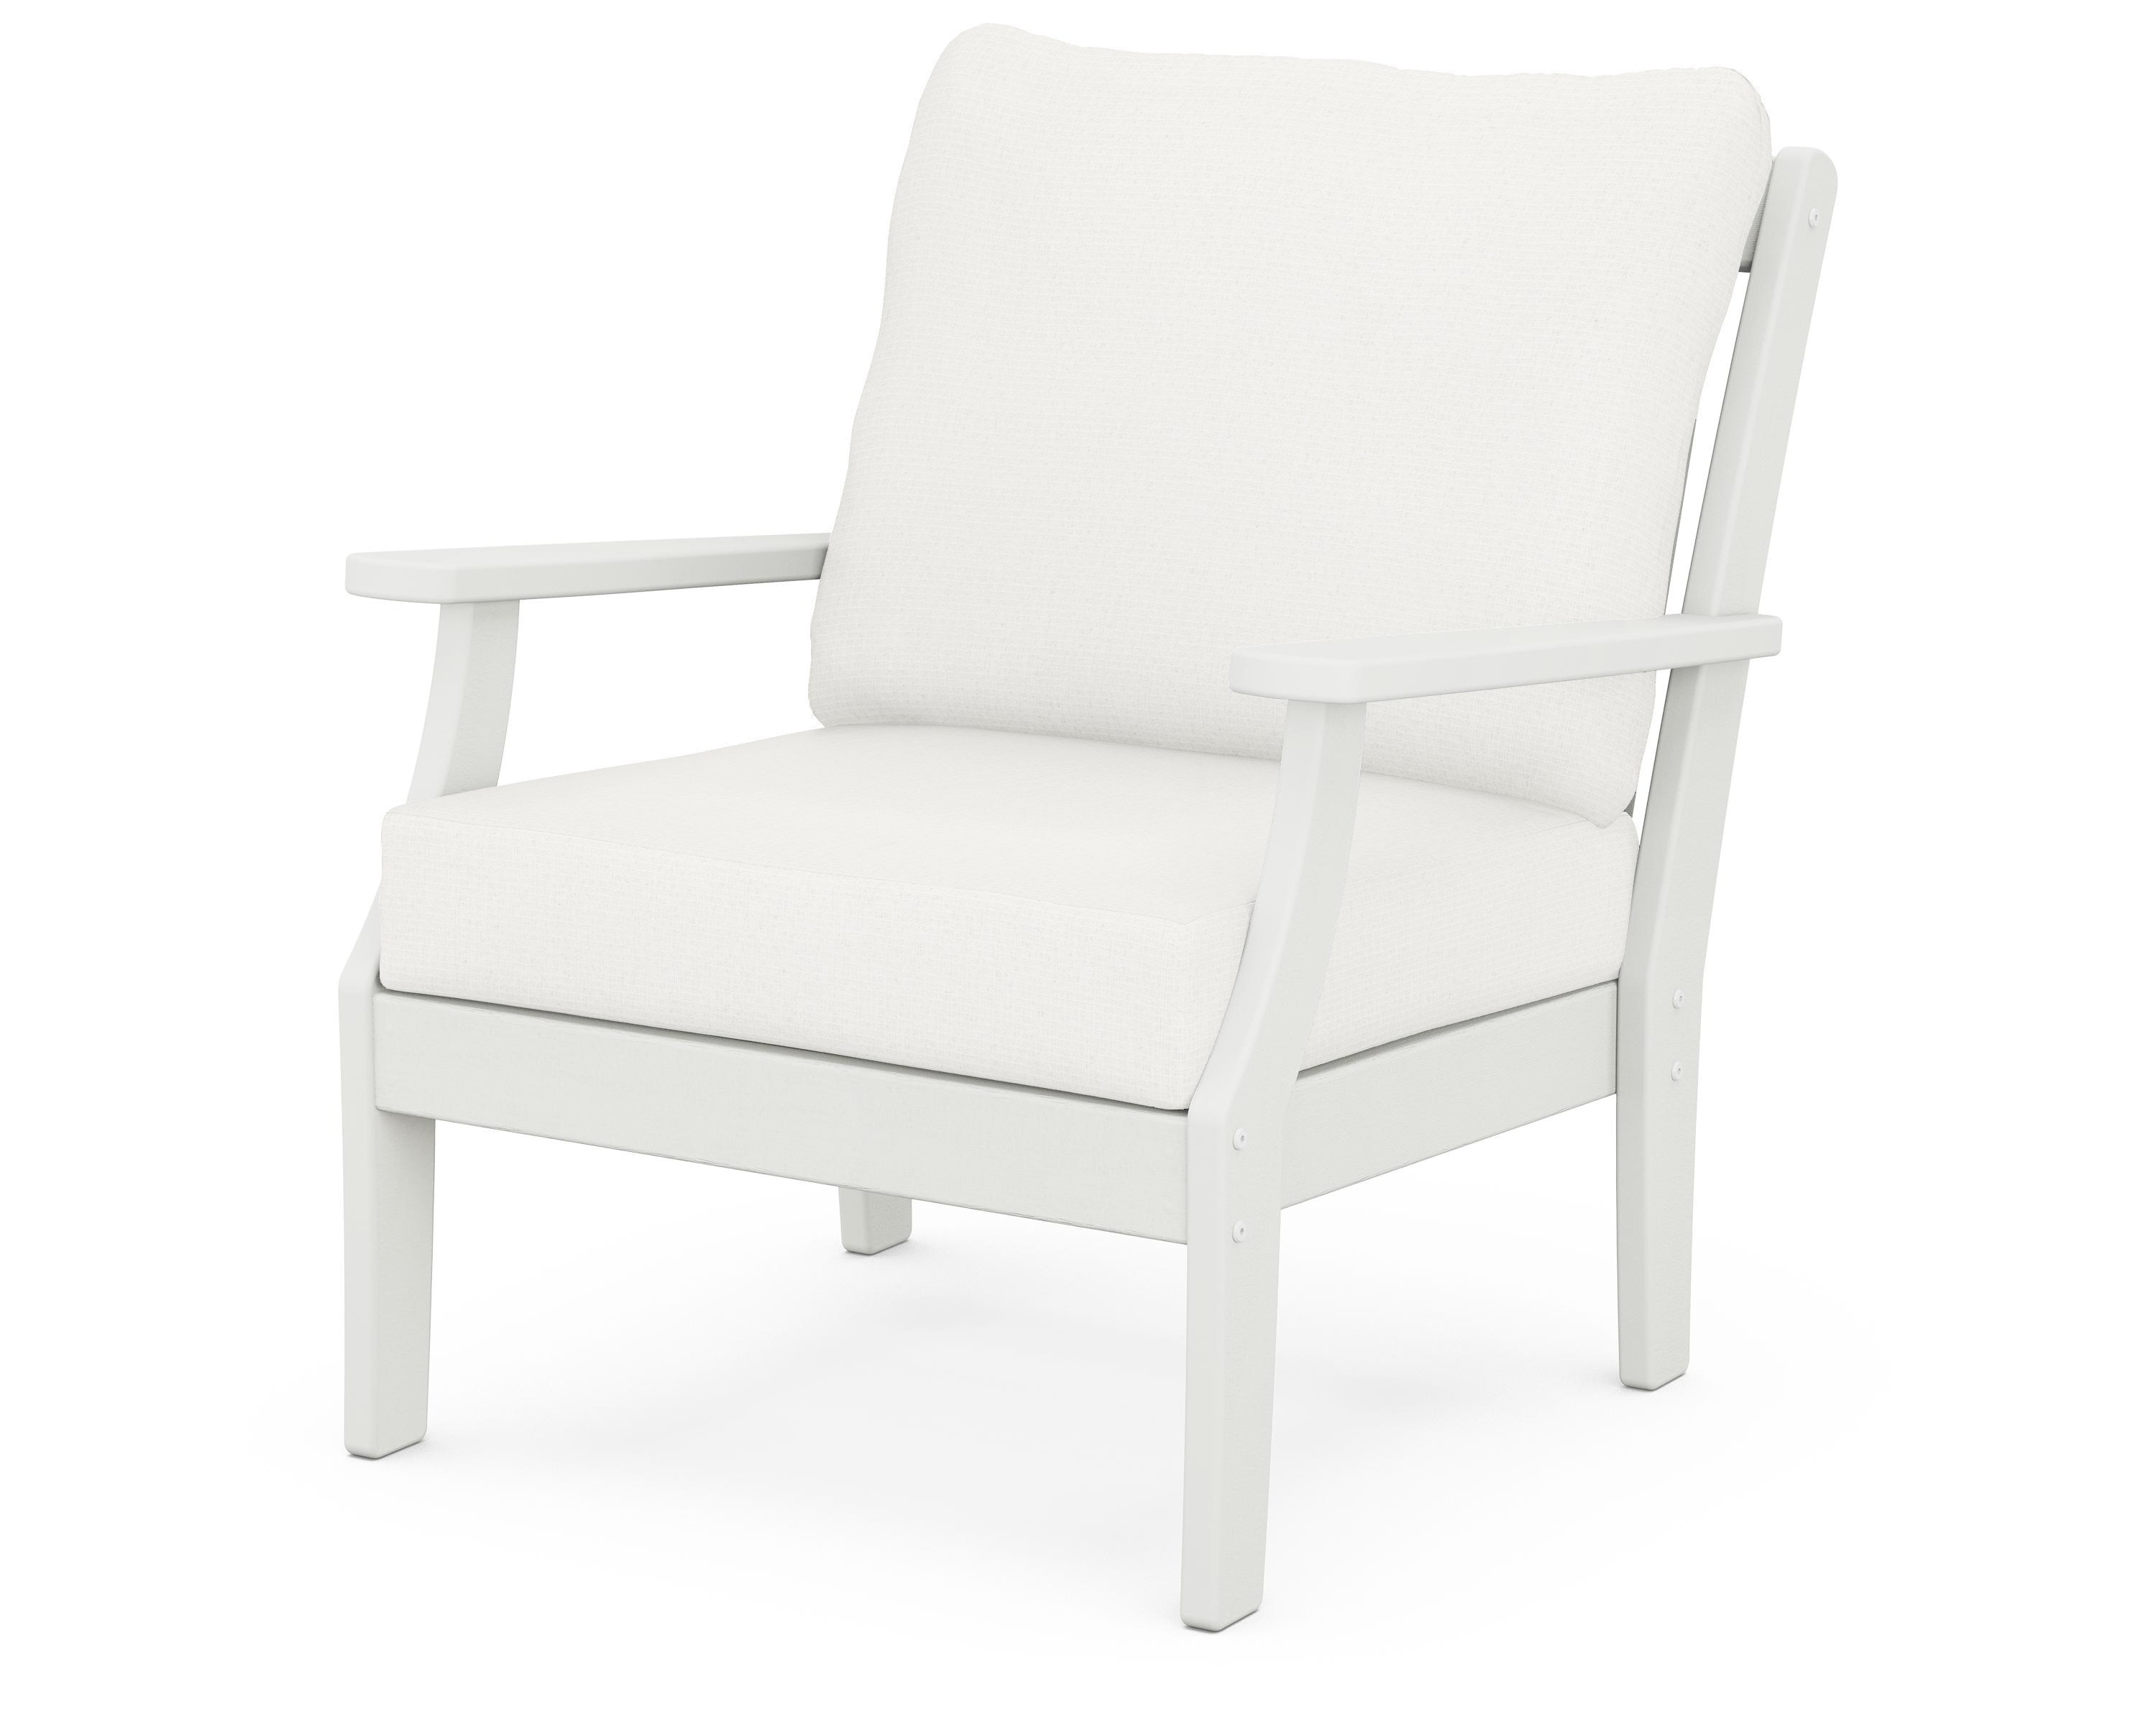 POLYWOOD Braxton Deep Seating Chair in Vintage Finish